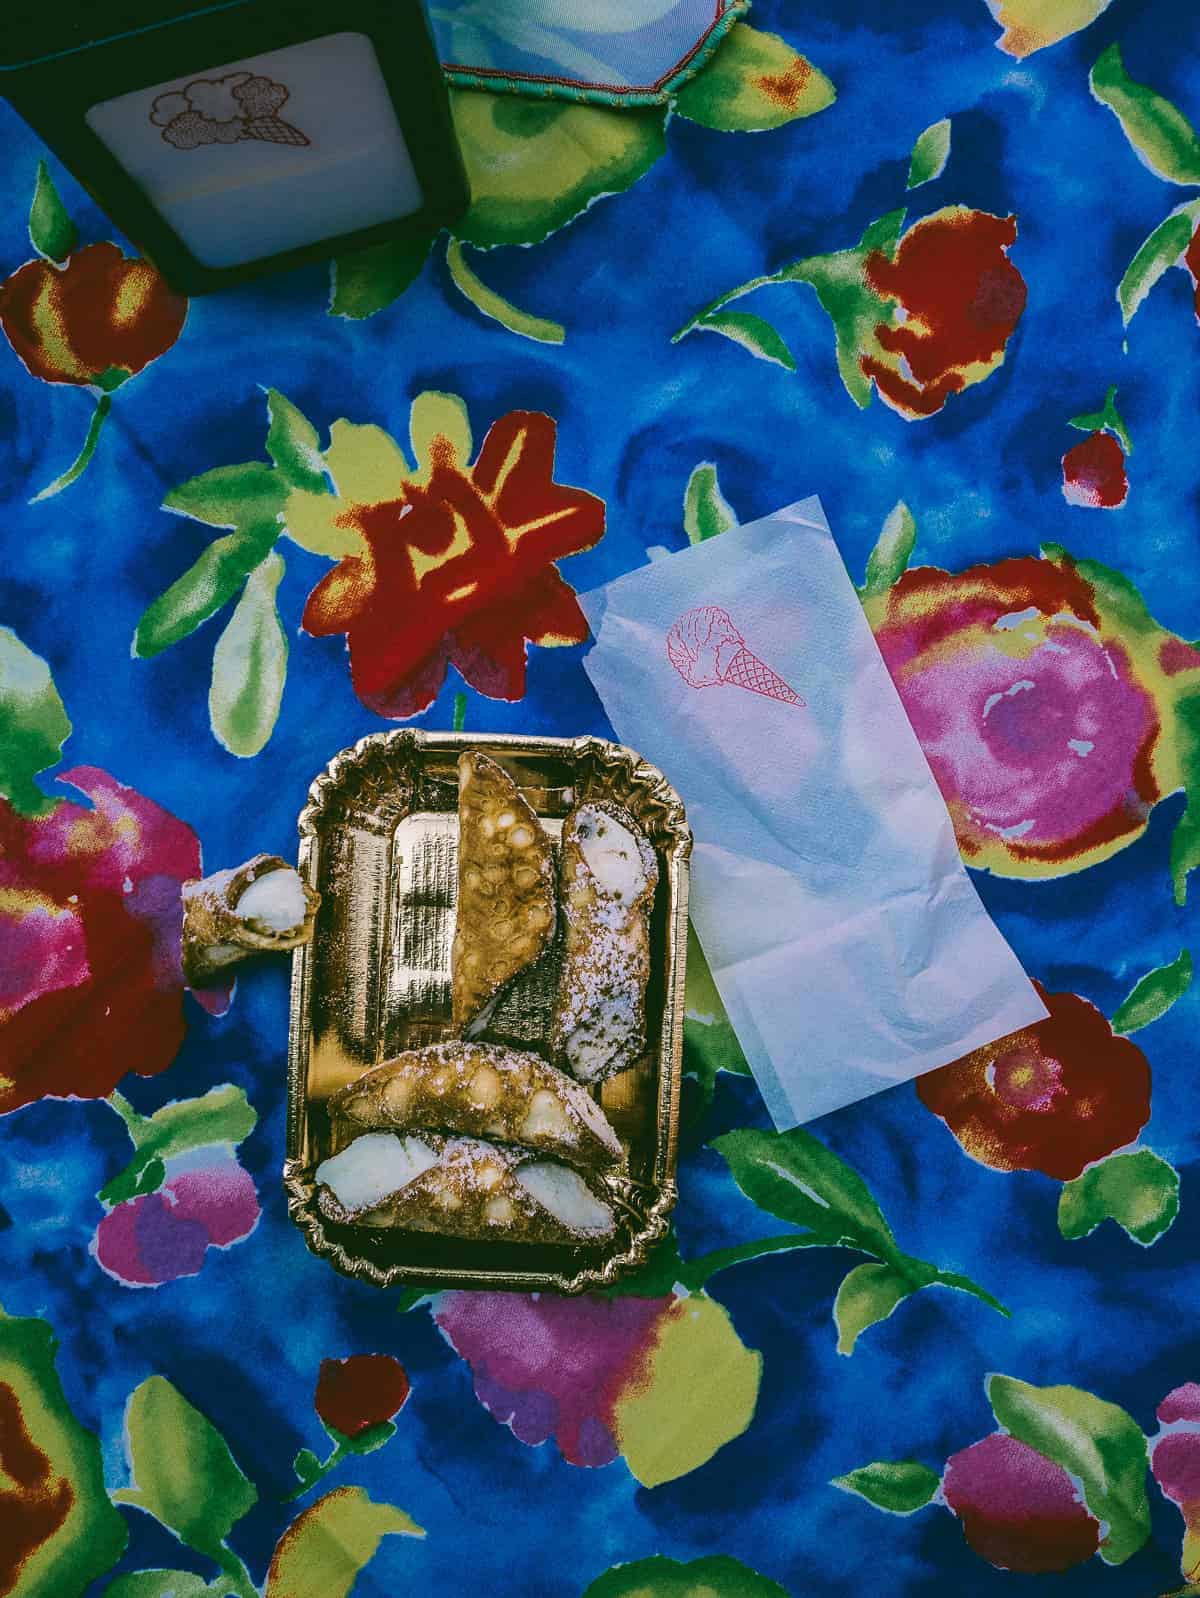 traditional cannoli served on colourful tablecloth in Taormina Sicily